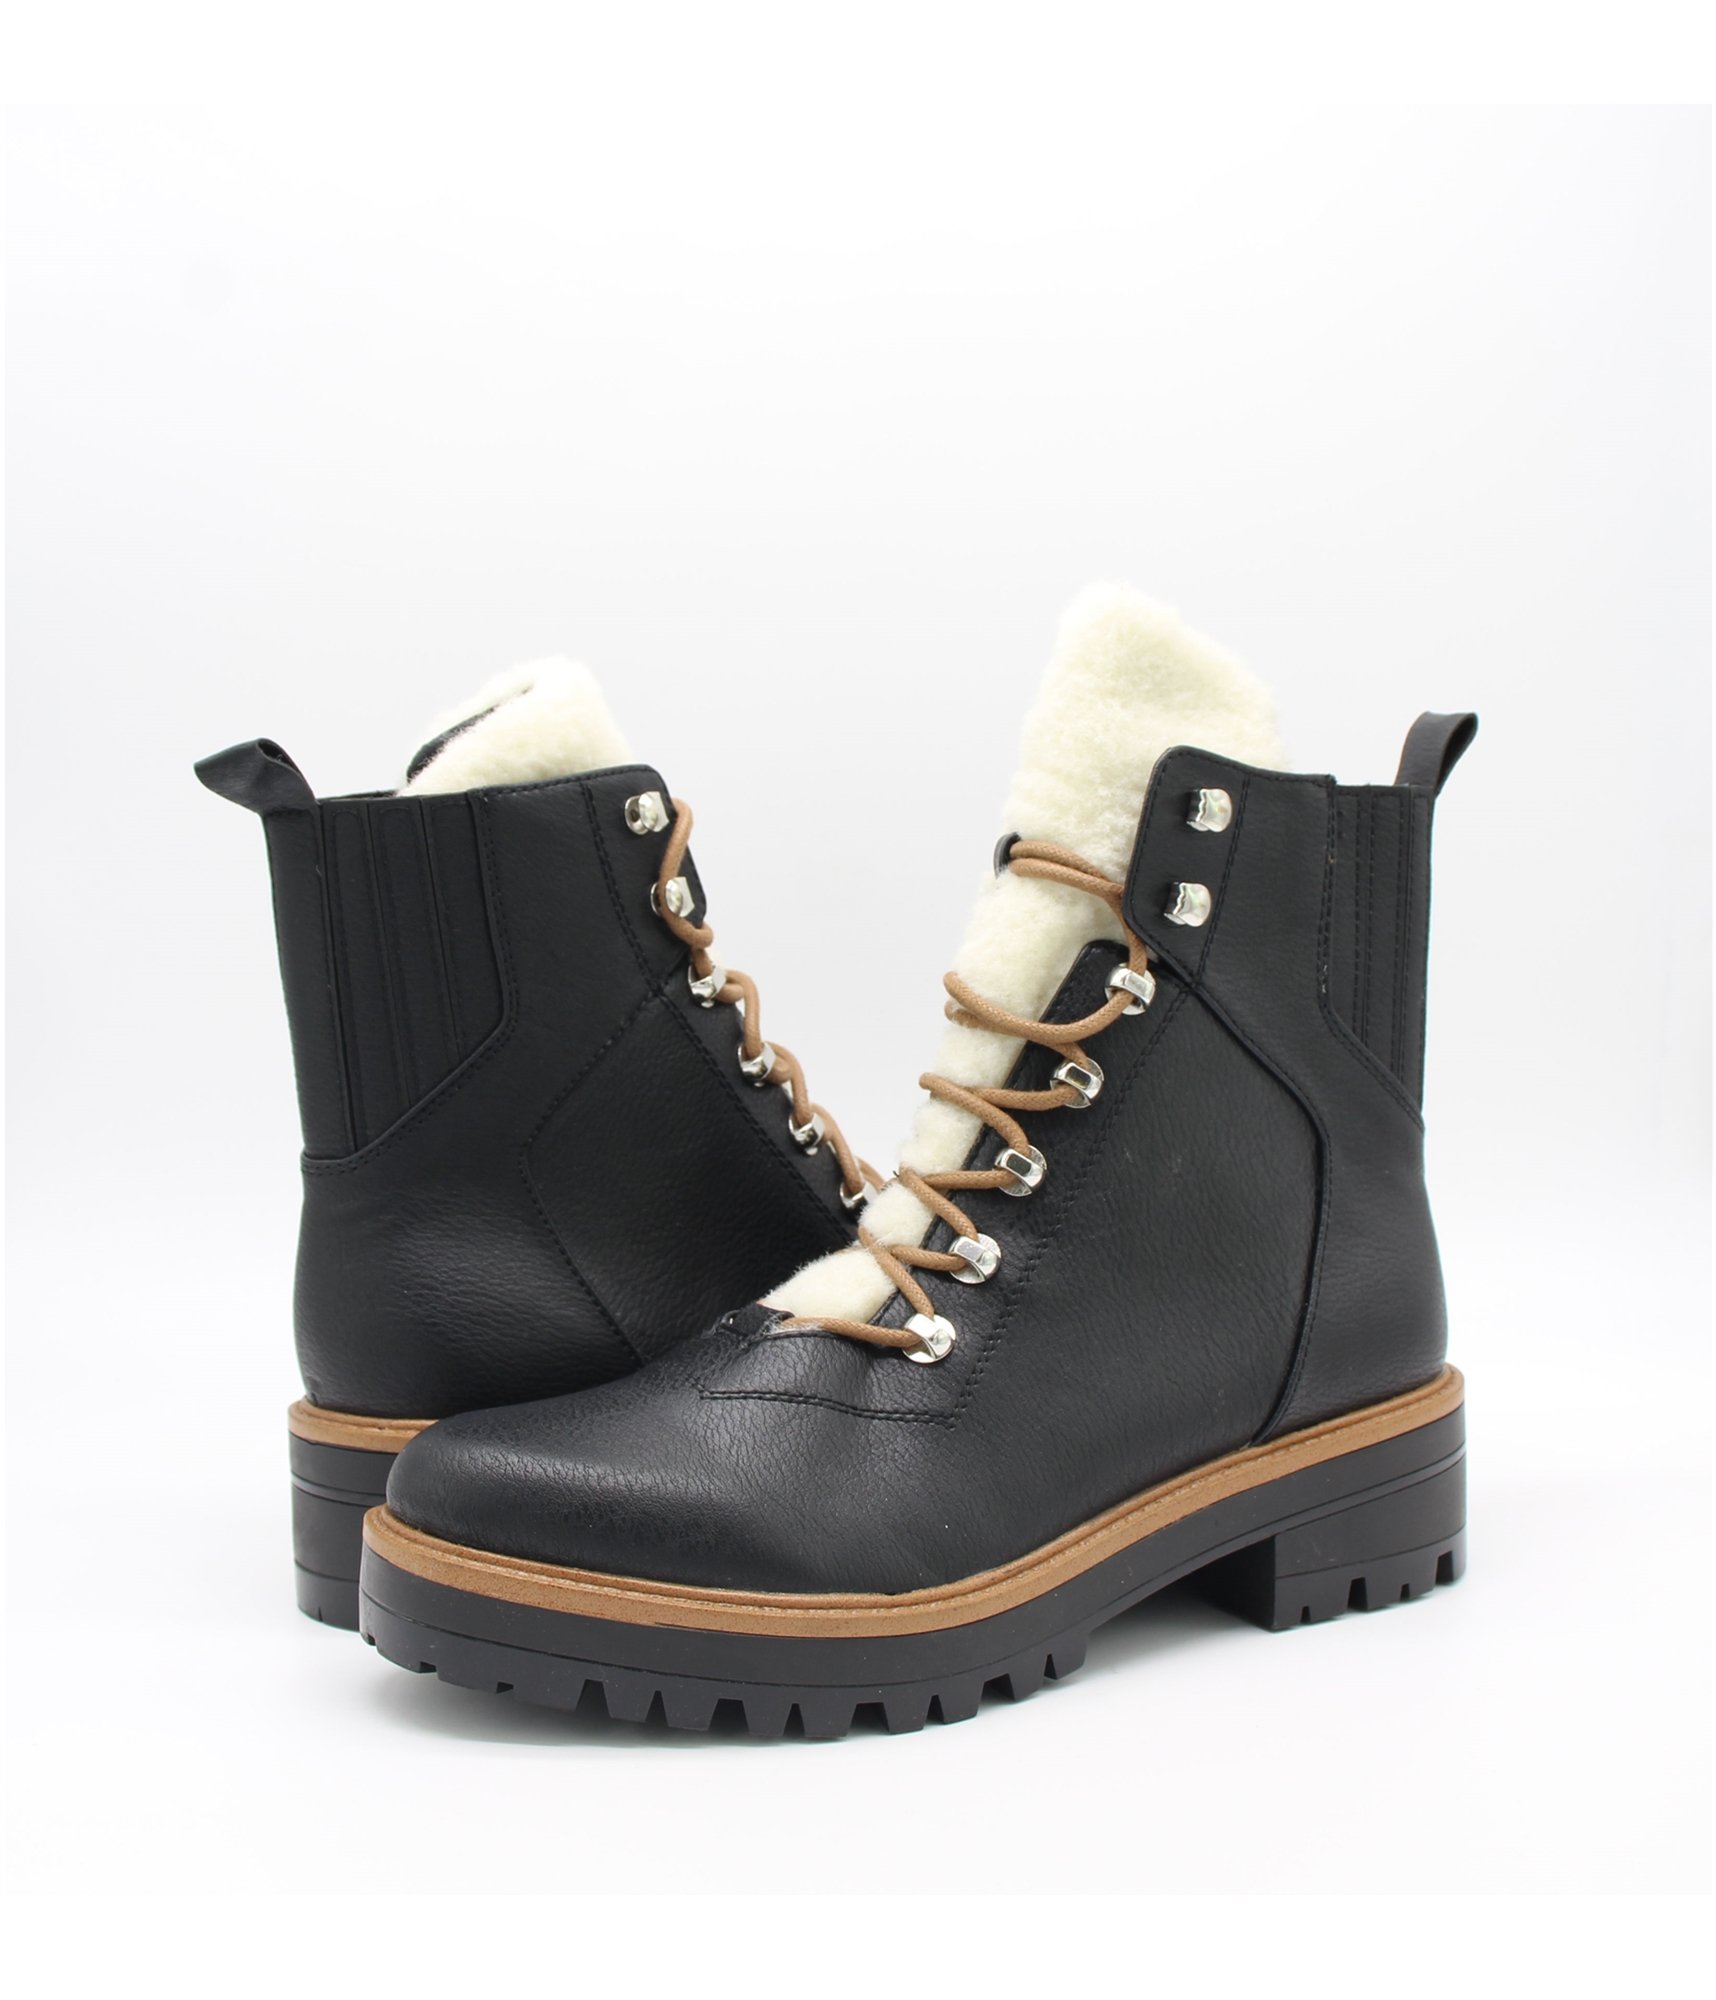 Black-brown-combat-boots-for-women